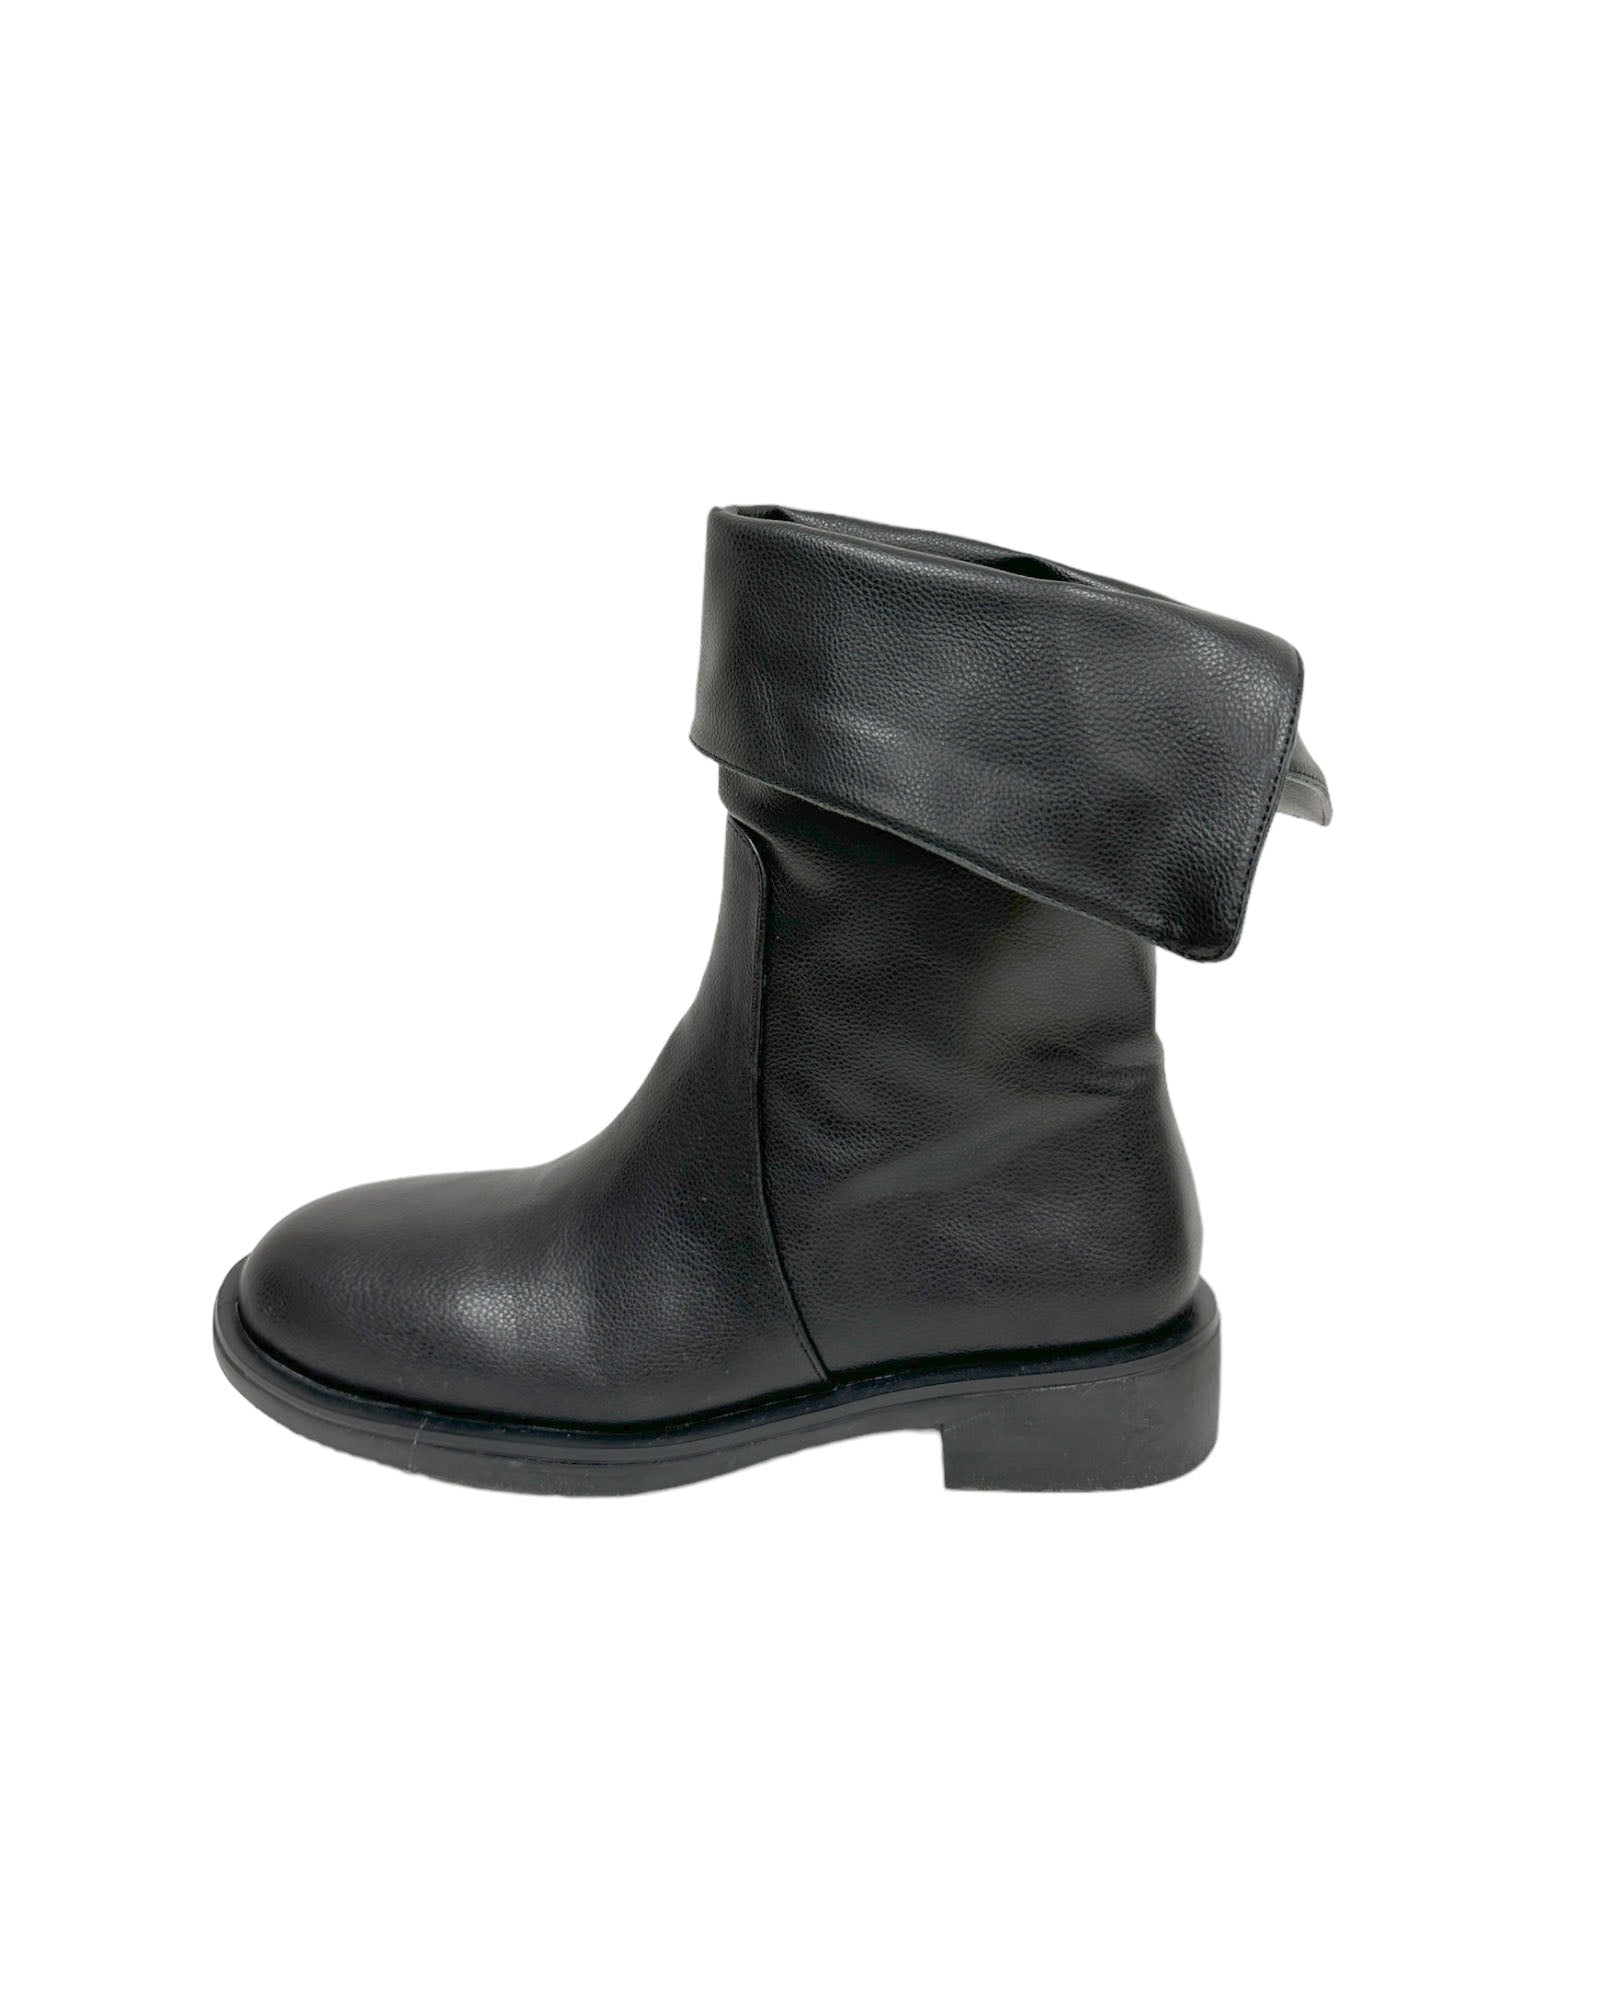 black leather fold over boots - 35, 37 – STYLEGAL